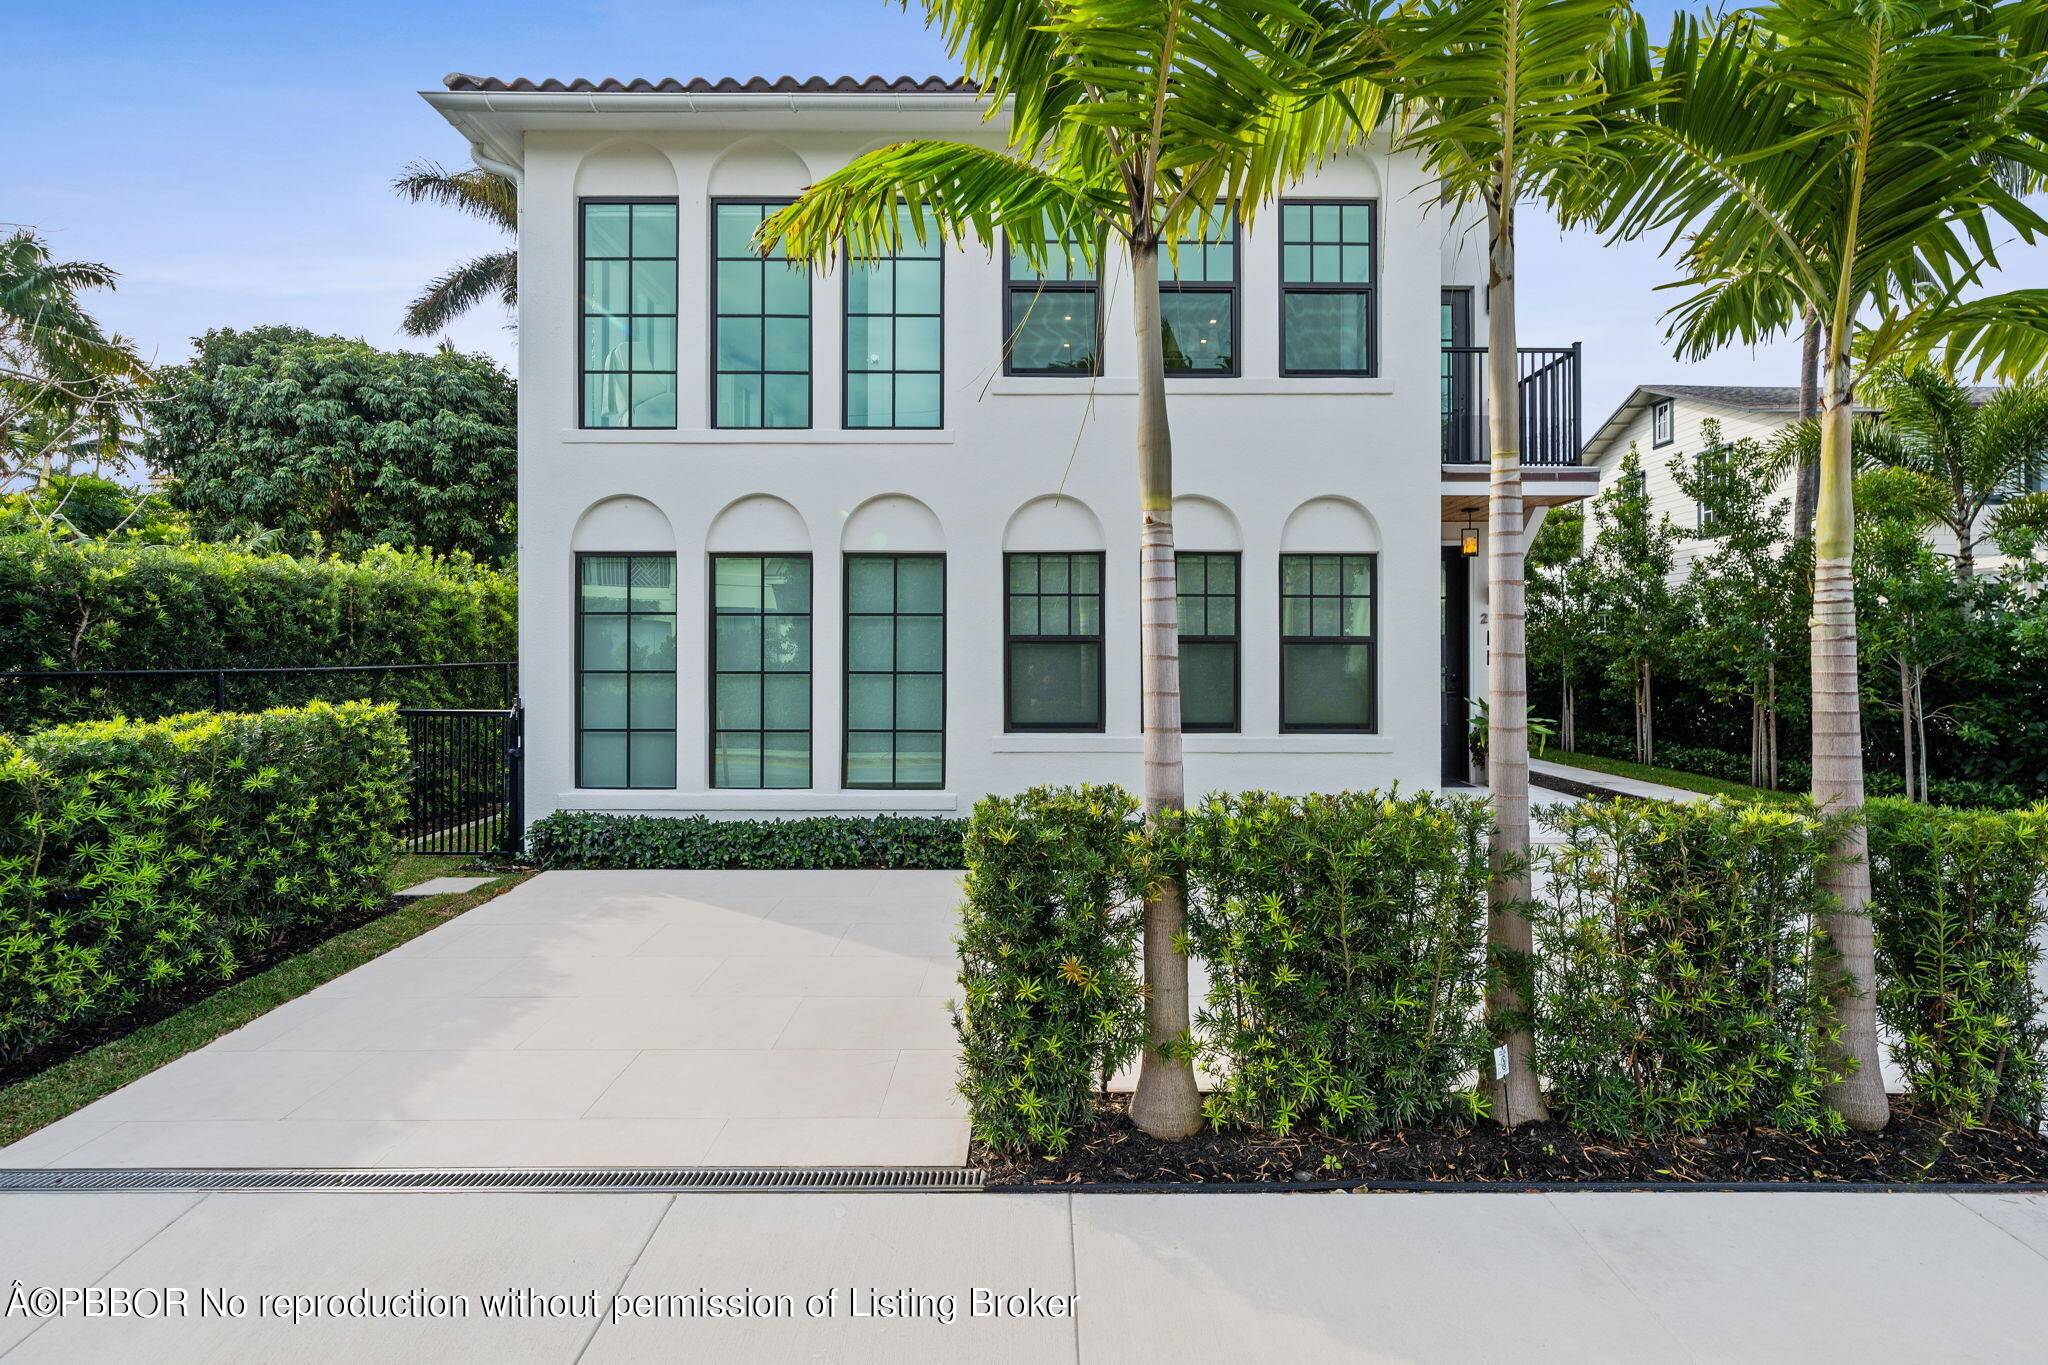 Nestled in the heart of Palm Beach, this 2 2 apartment is the epitome of modern luxury living.